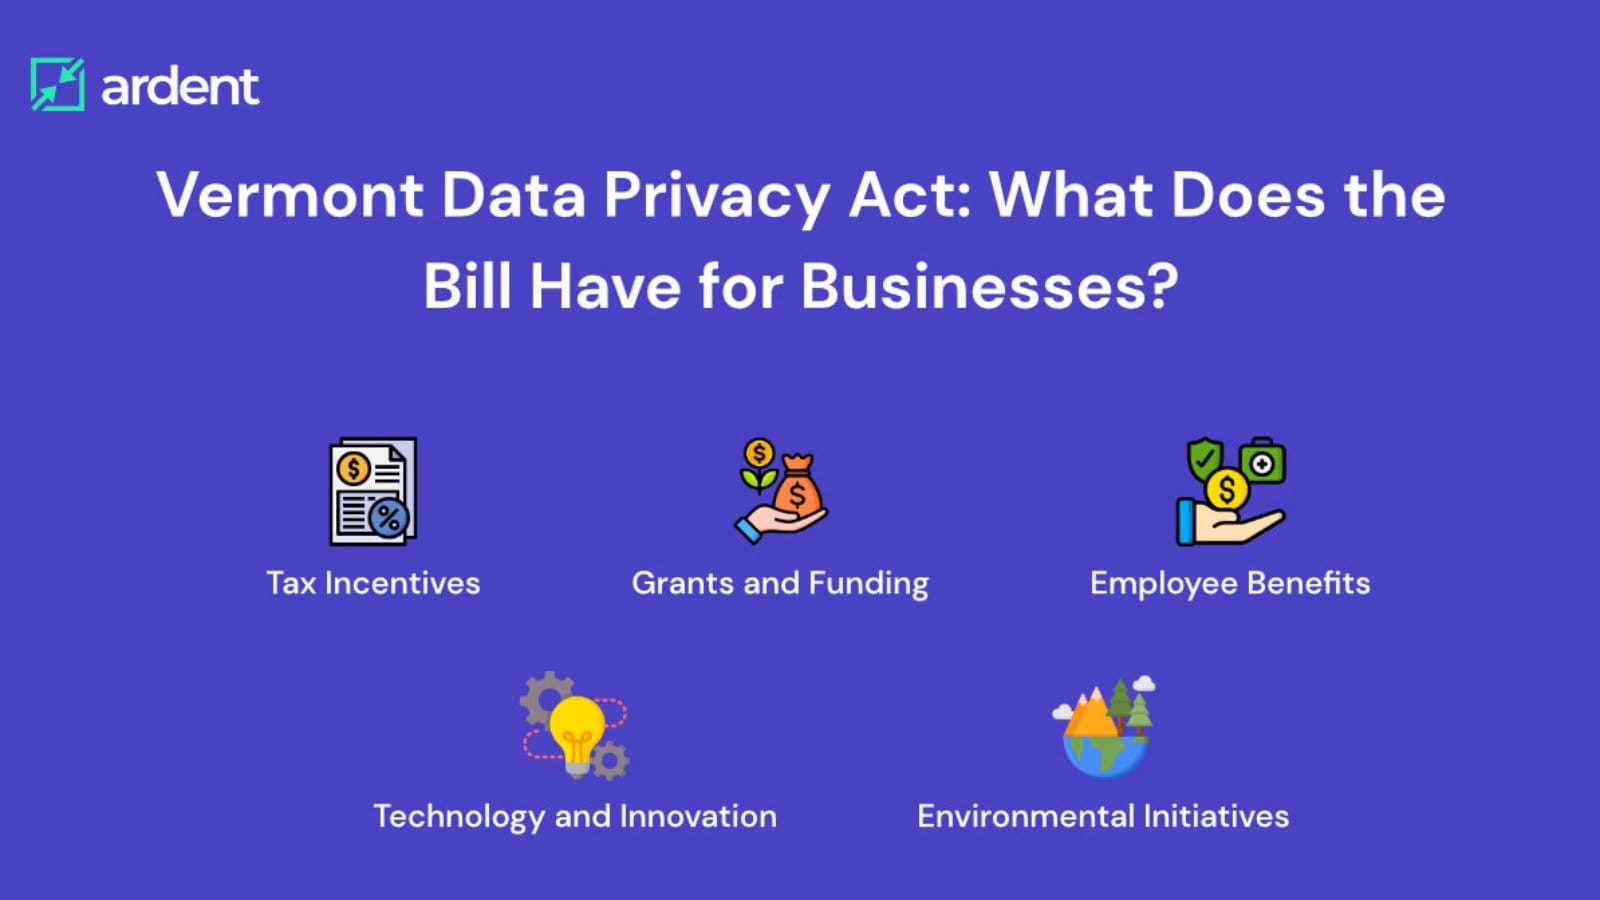 Vermont Data Privacy Act: What Does the Bill Have for Businesses?